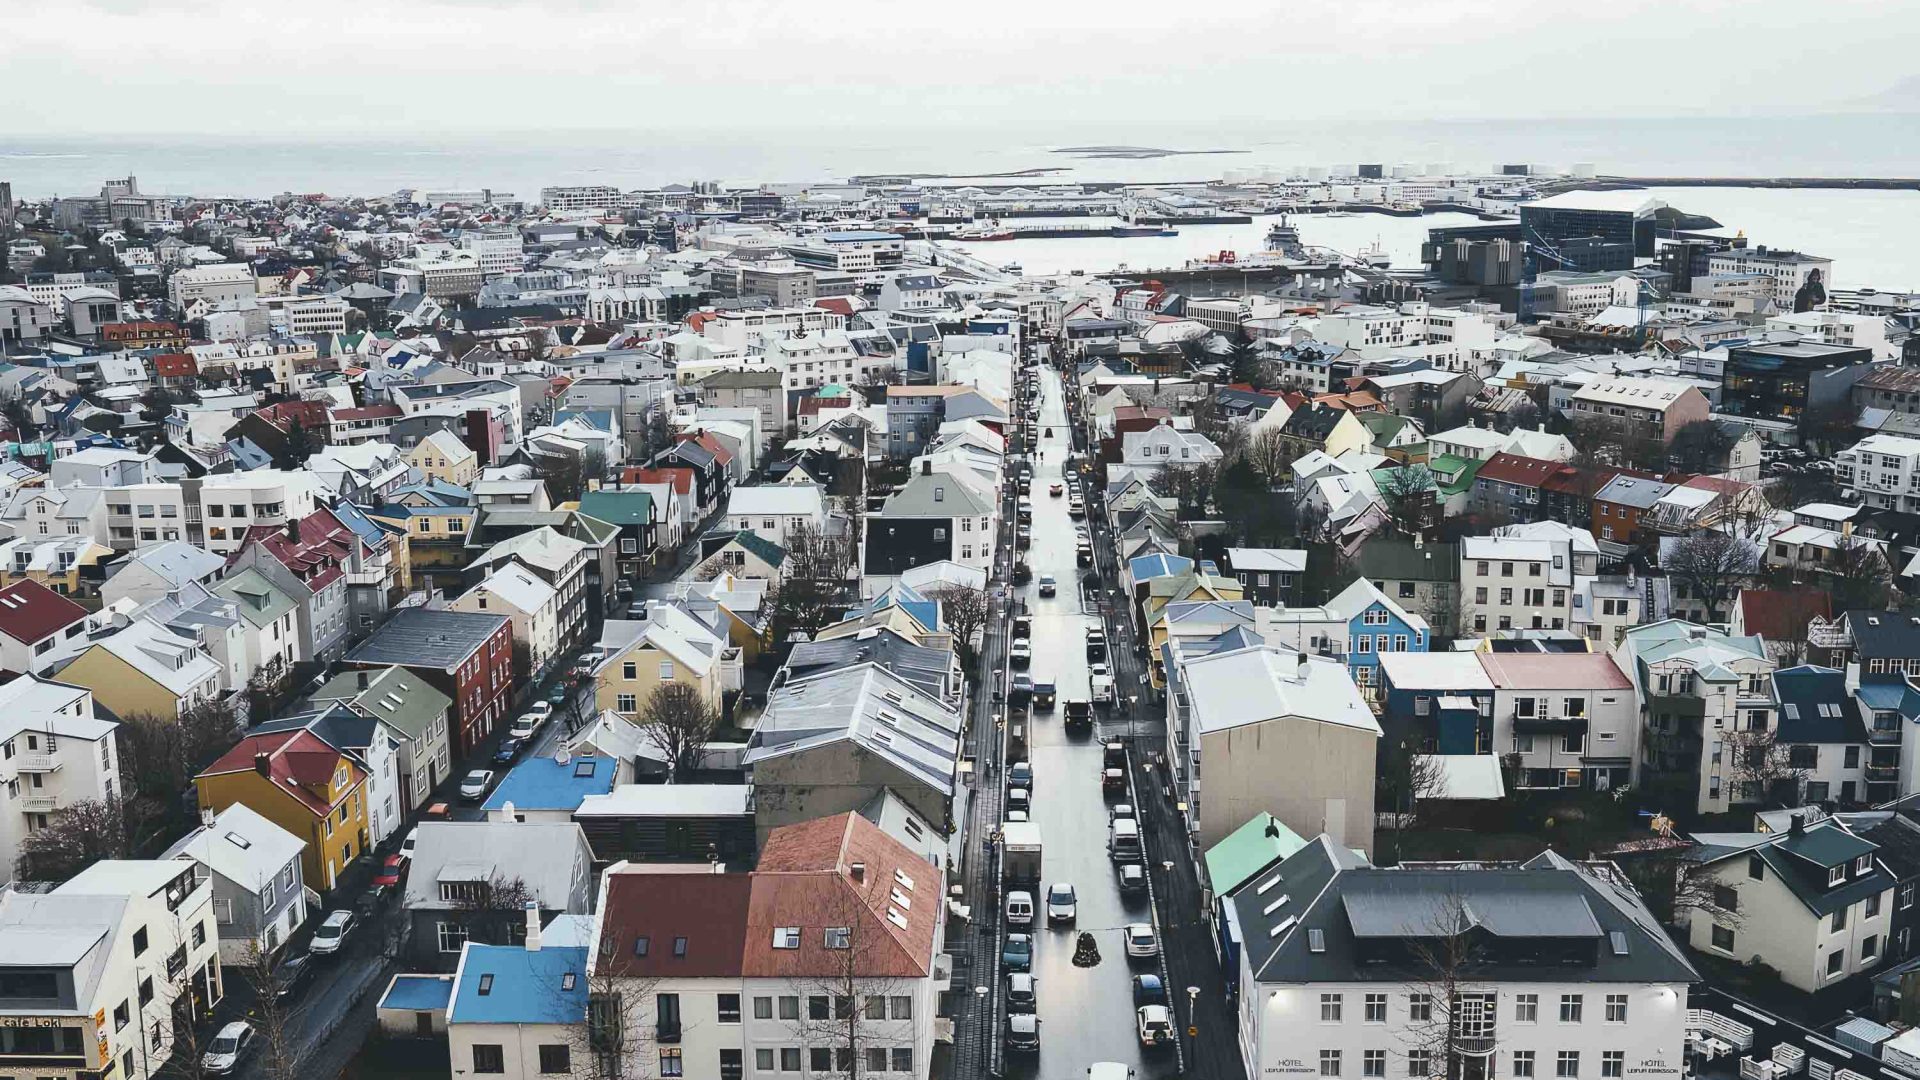 Looking down at the houses of Reykjavik.